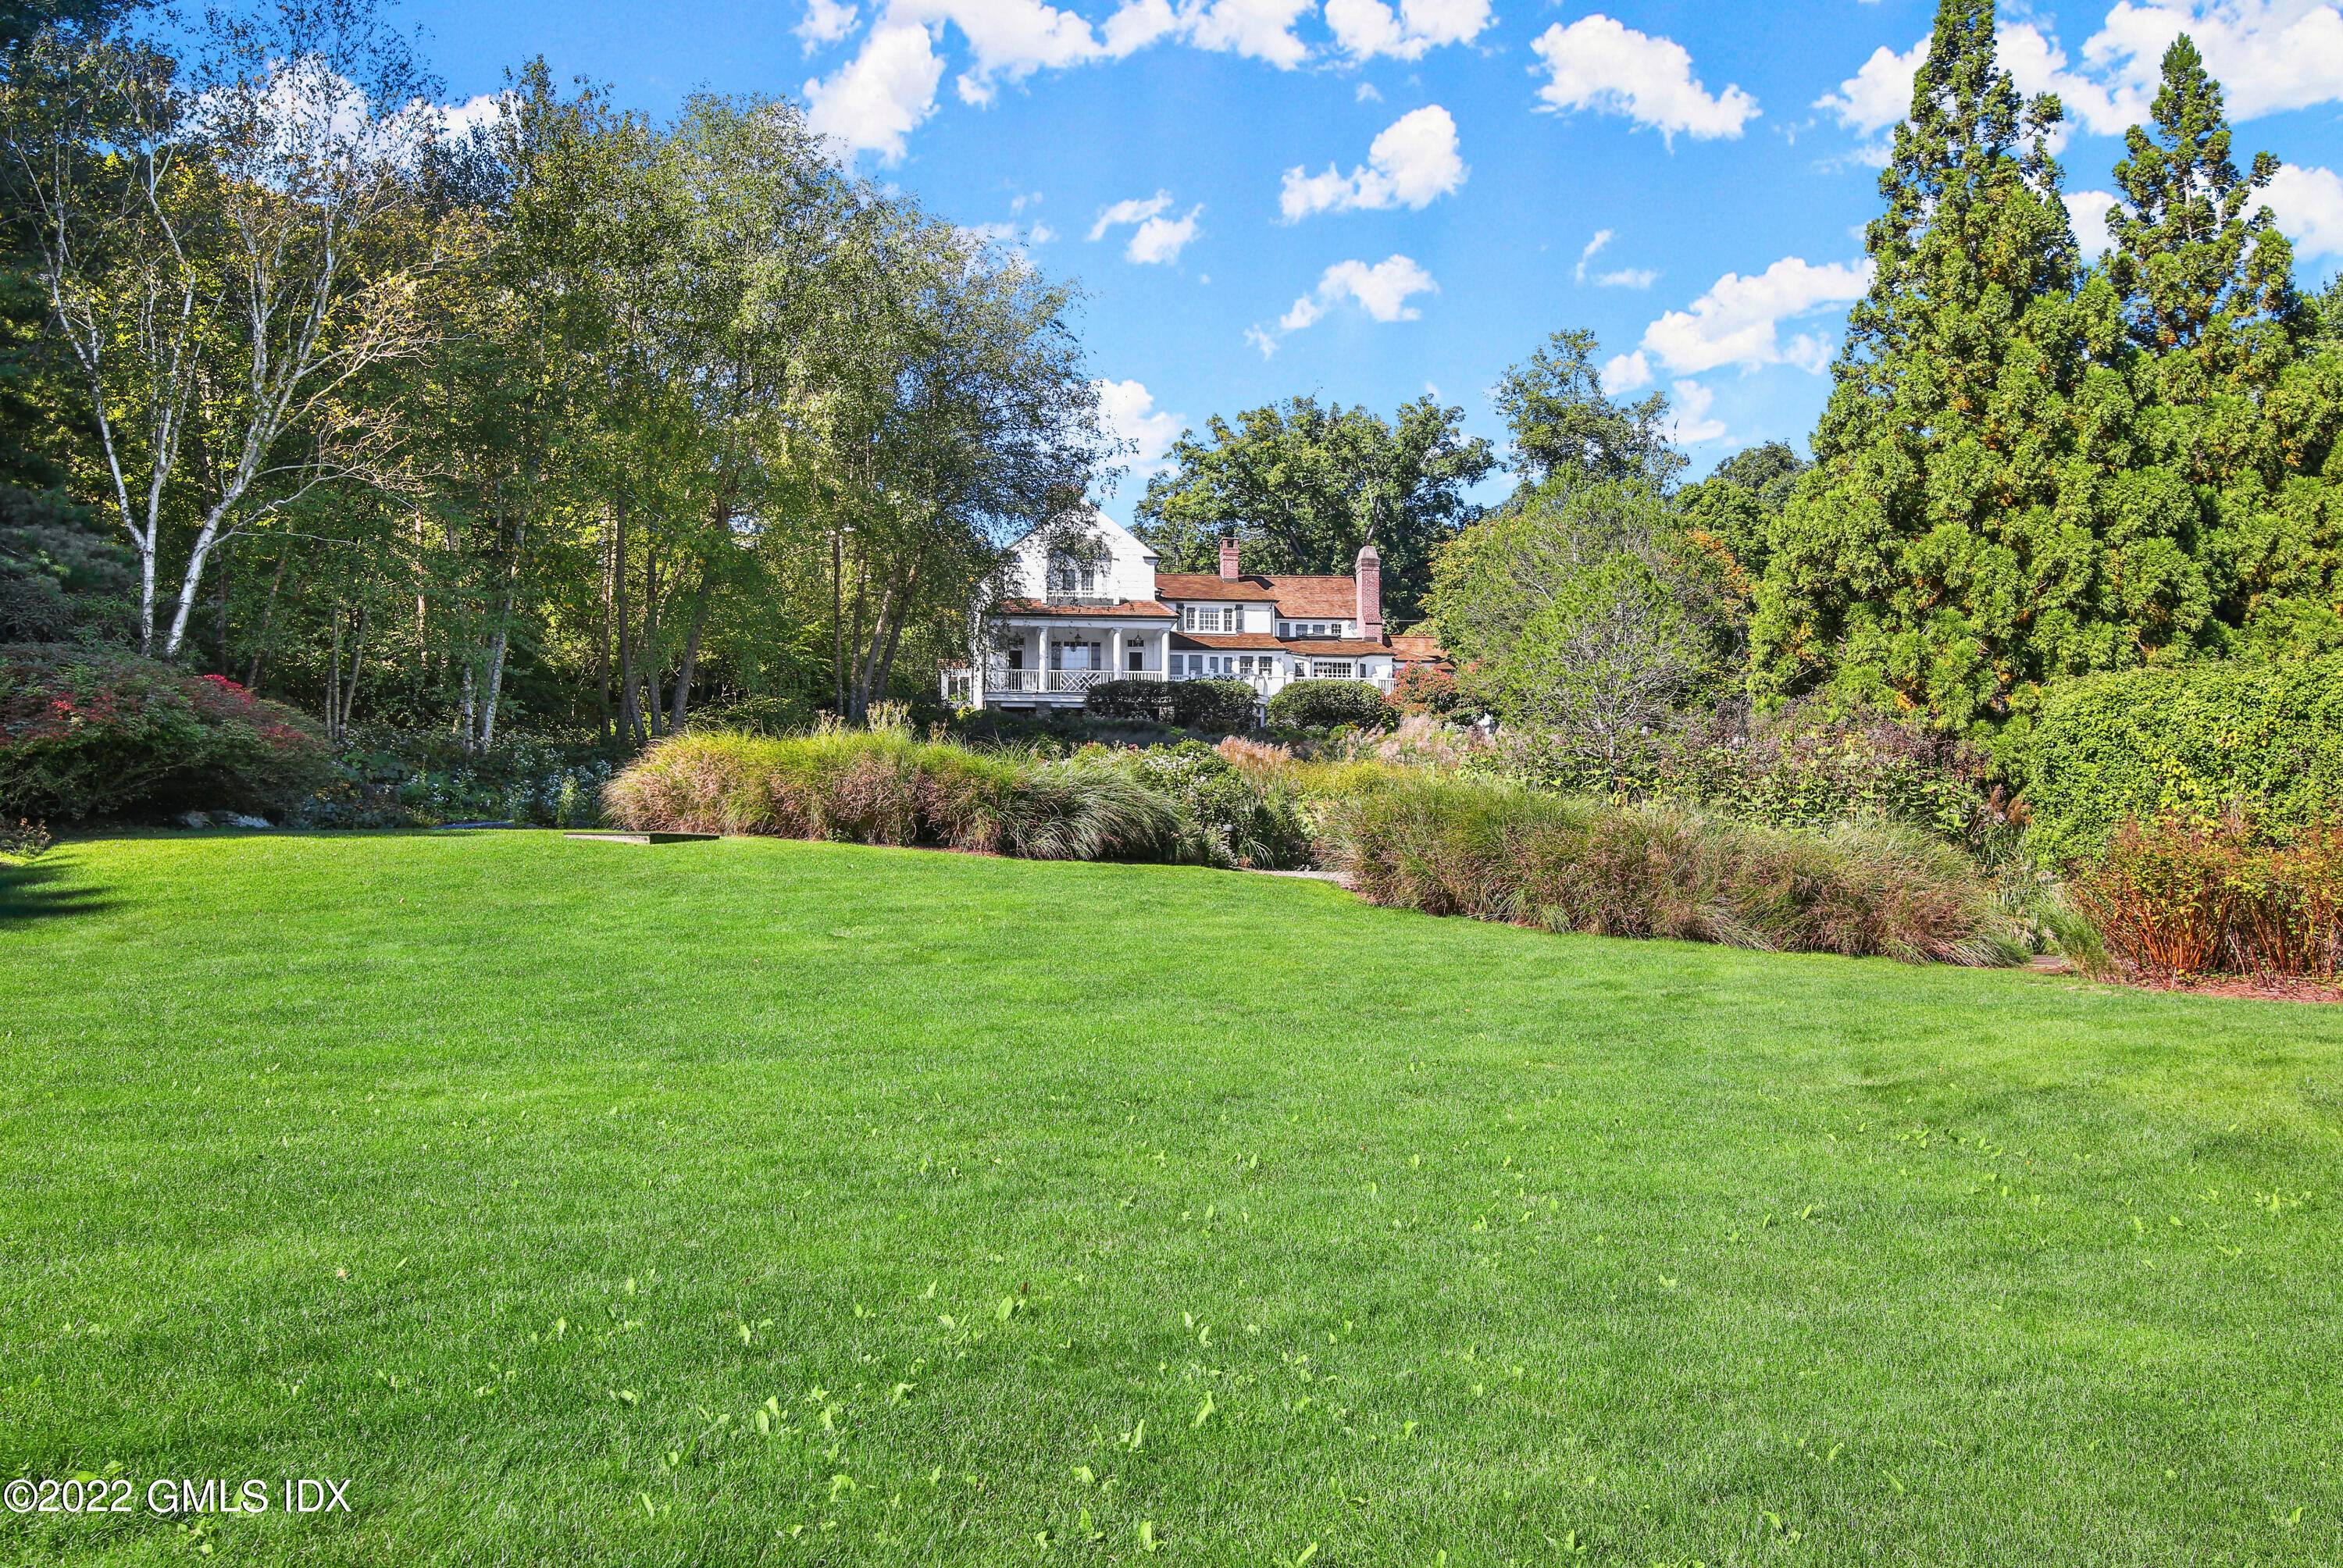 Unique 13 acre compound in private setting features renovated 1900's five bedroom Colonial ; 2, 500 sq.